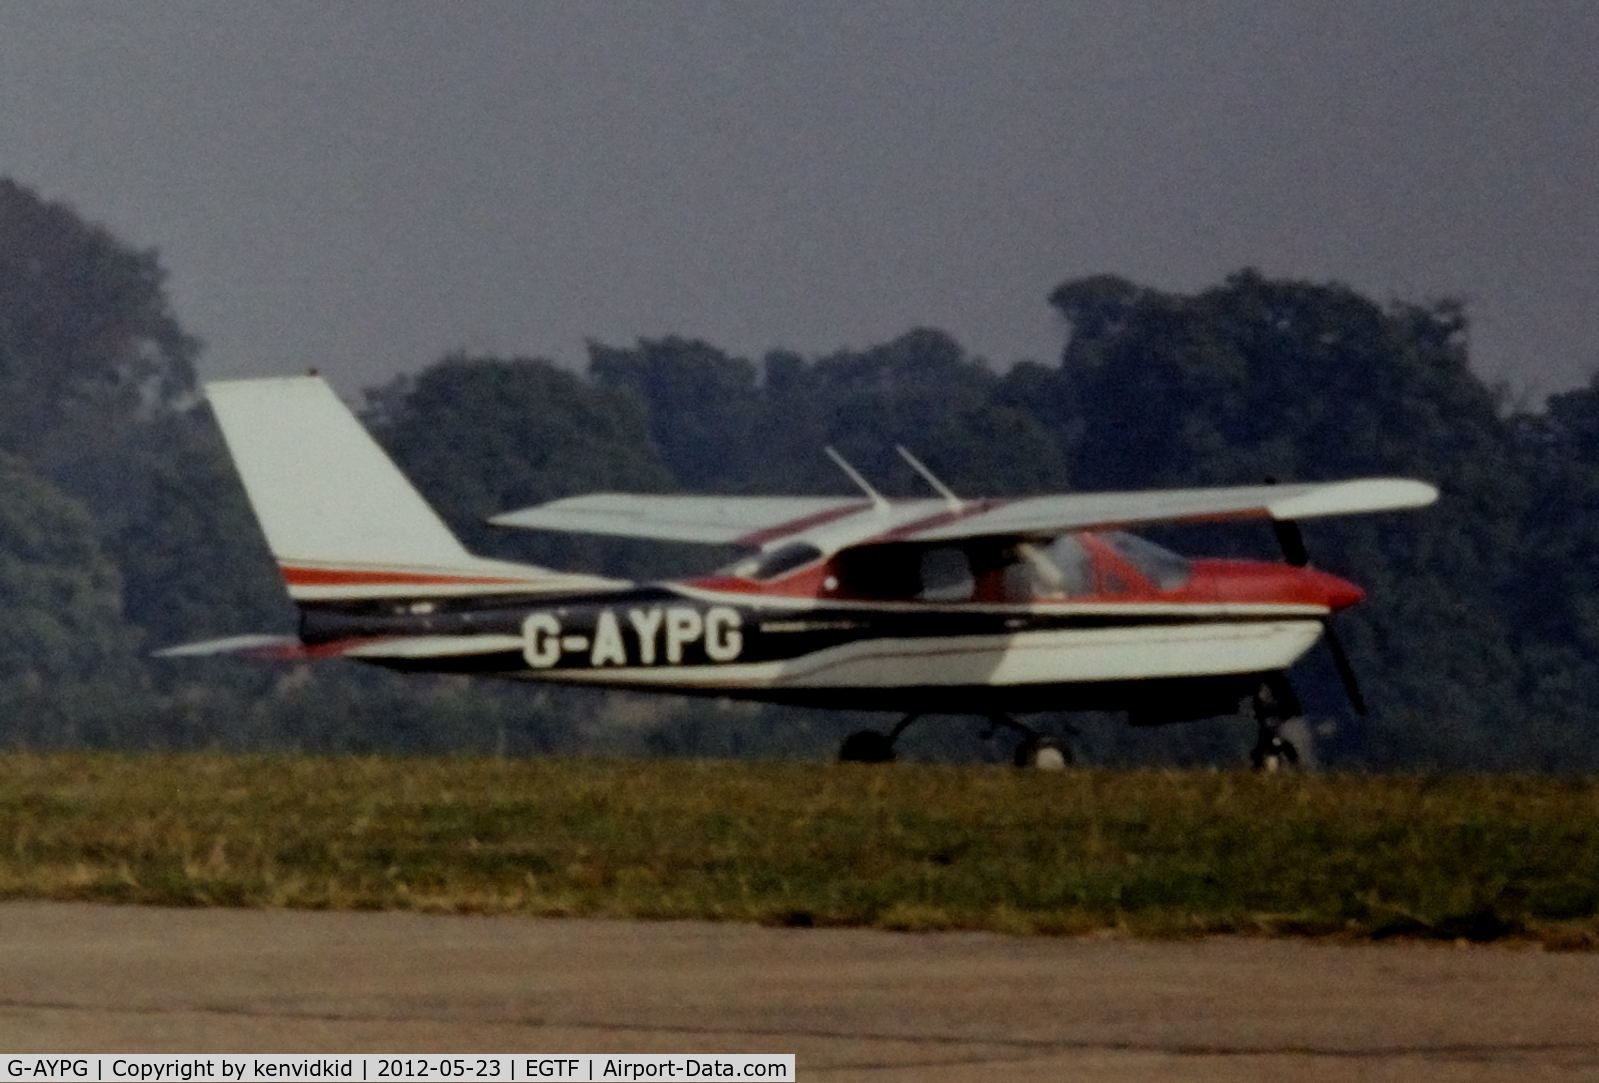 G-AYPG, 1971 Reims F177RG Cardinal RG C/N 0007, At Fairoaks in the mid 1970's.
Copied from slide.